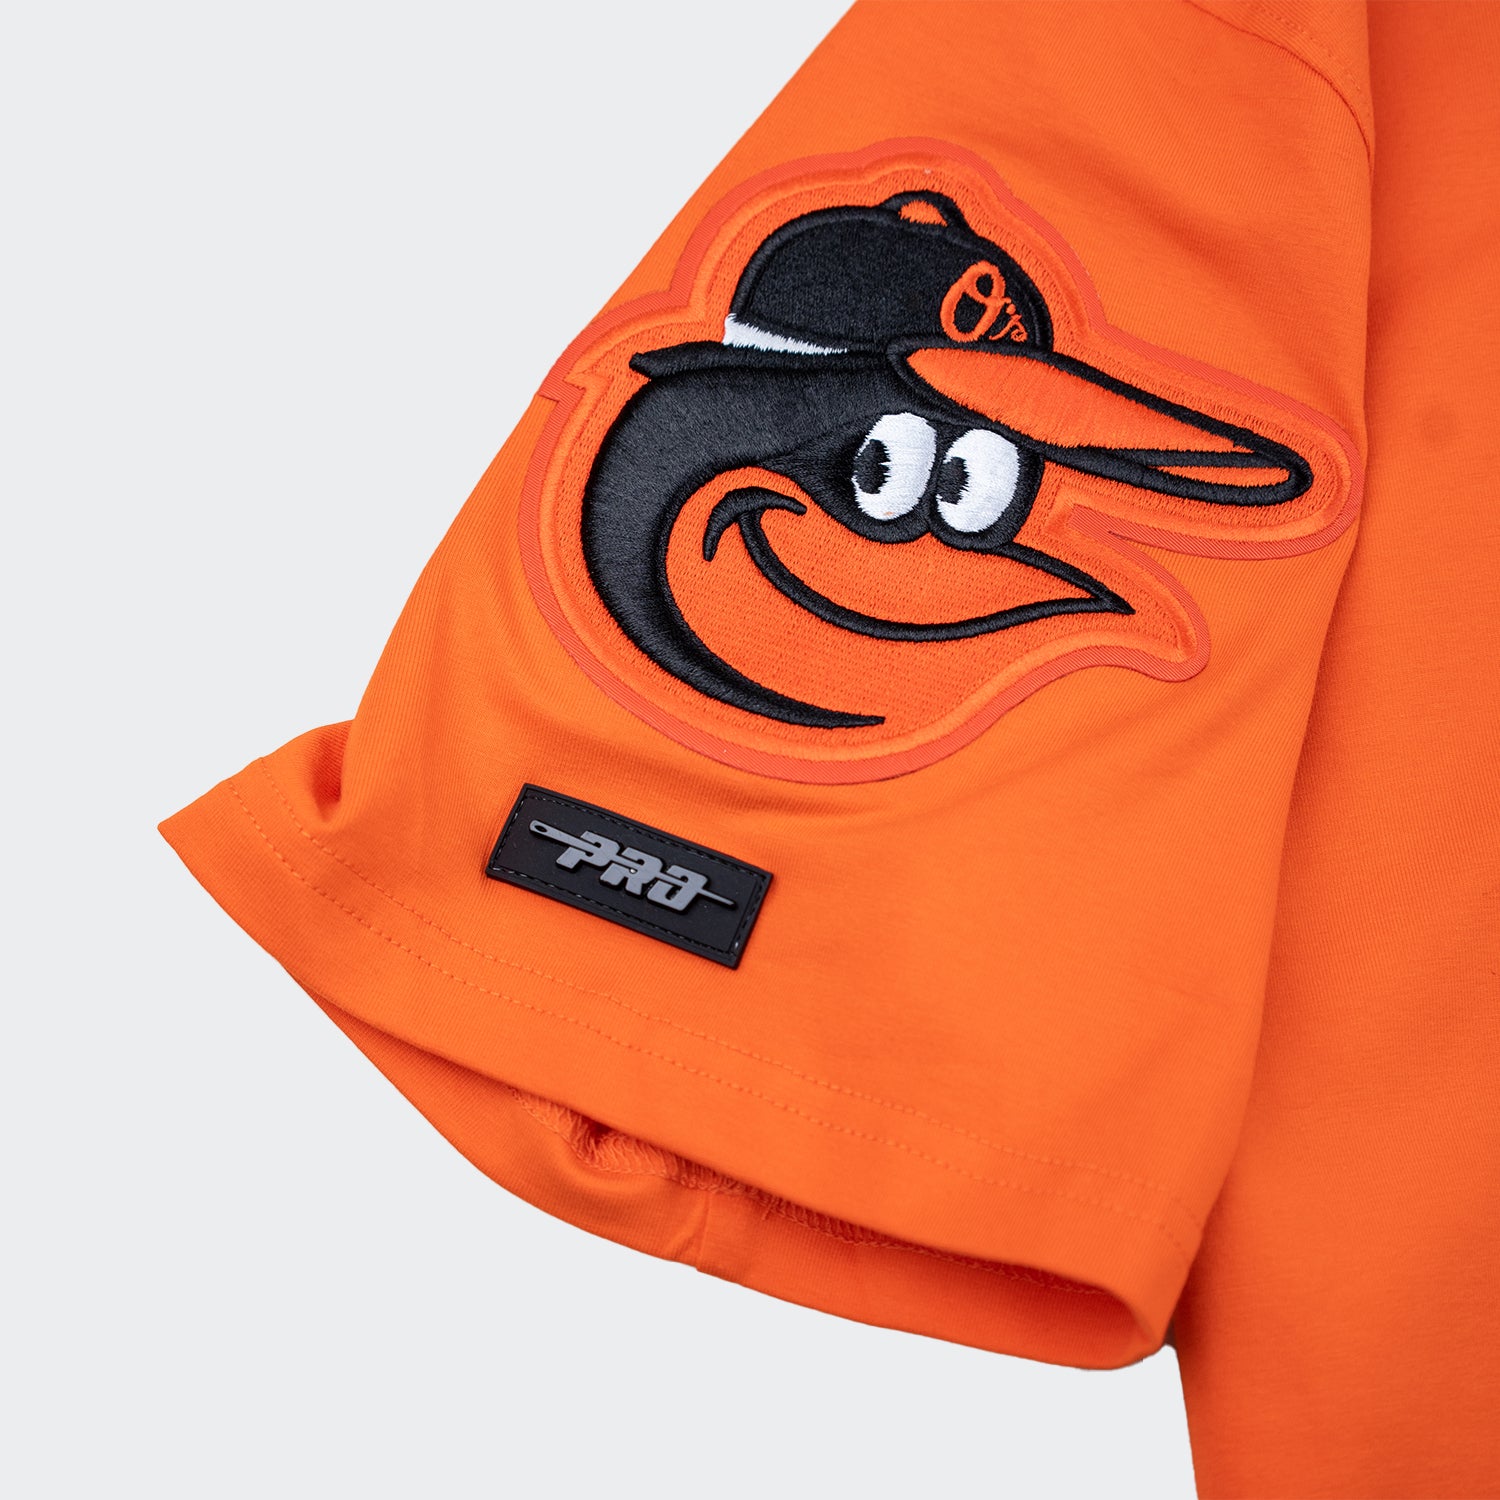 Baltimore Orioles Jersey For Youth, Women, or Men